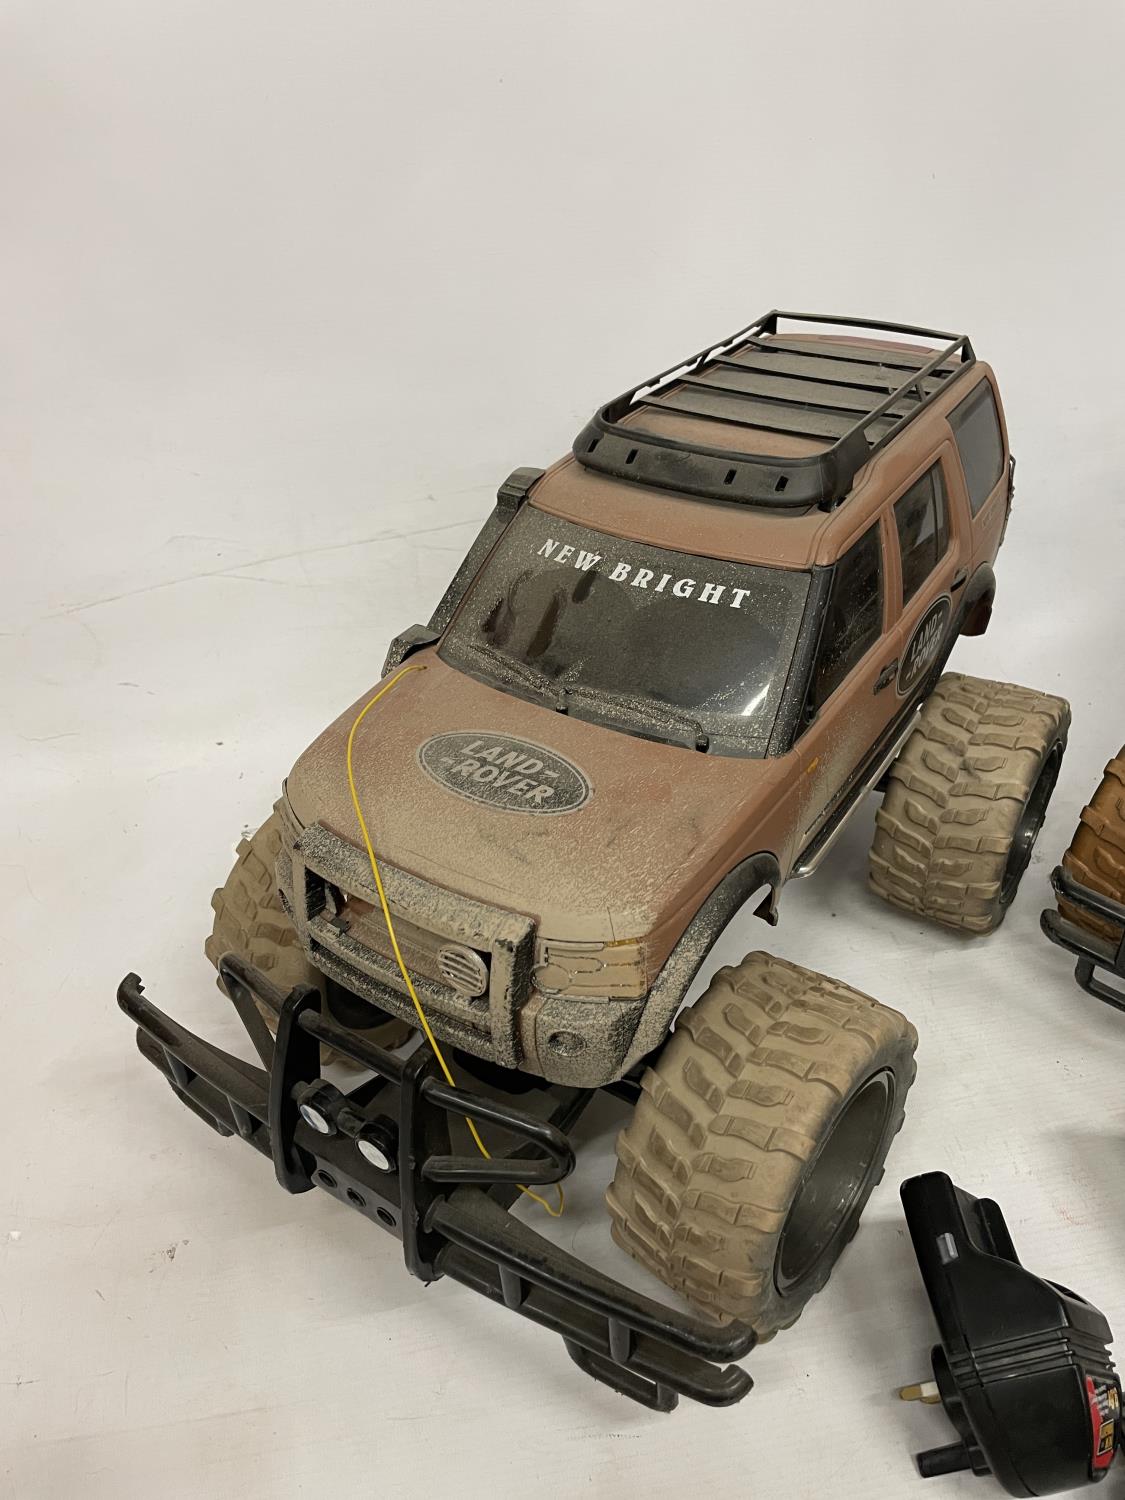 TWO REMOTE CONTROL LANDROVERS WITH BATTERIES, CHARGERS AND ONE REMOTE CONTROL, IN WORKING ORDER - Image 2 of 6